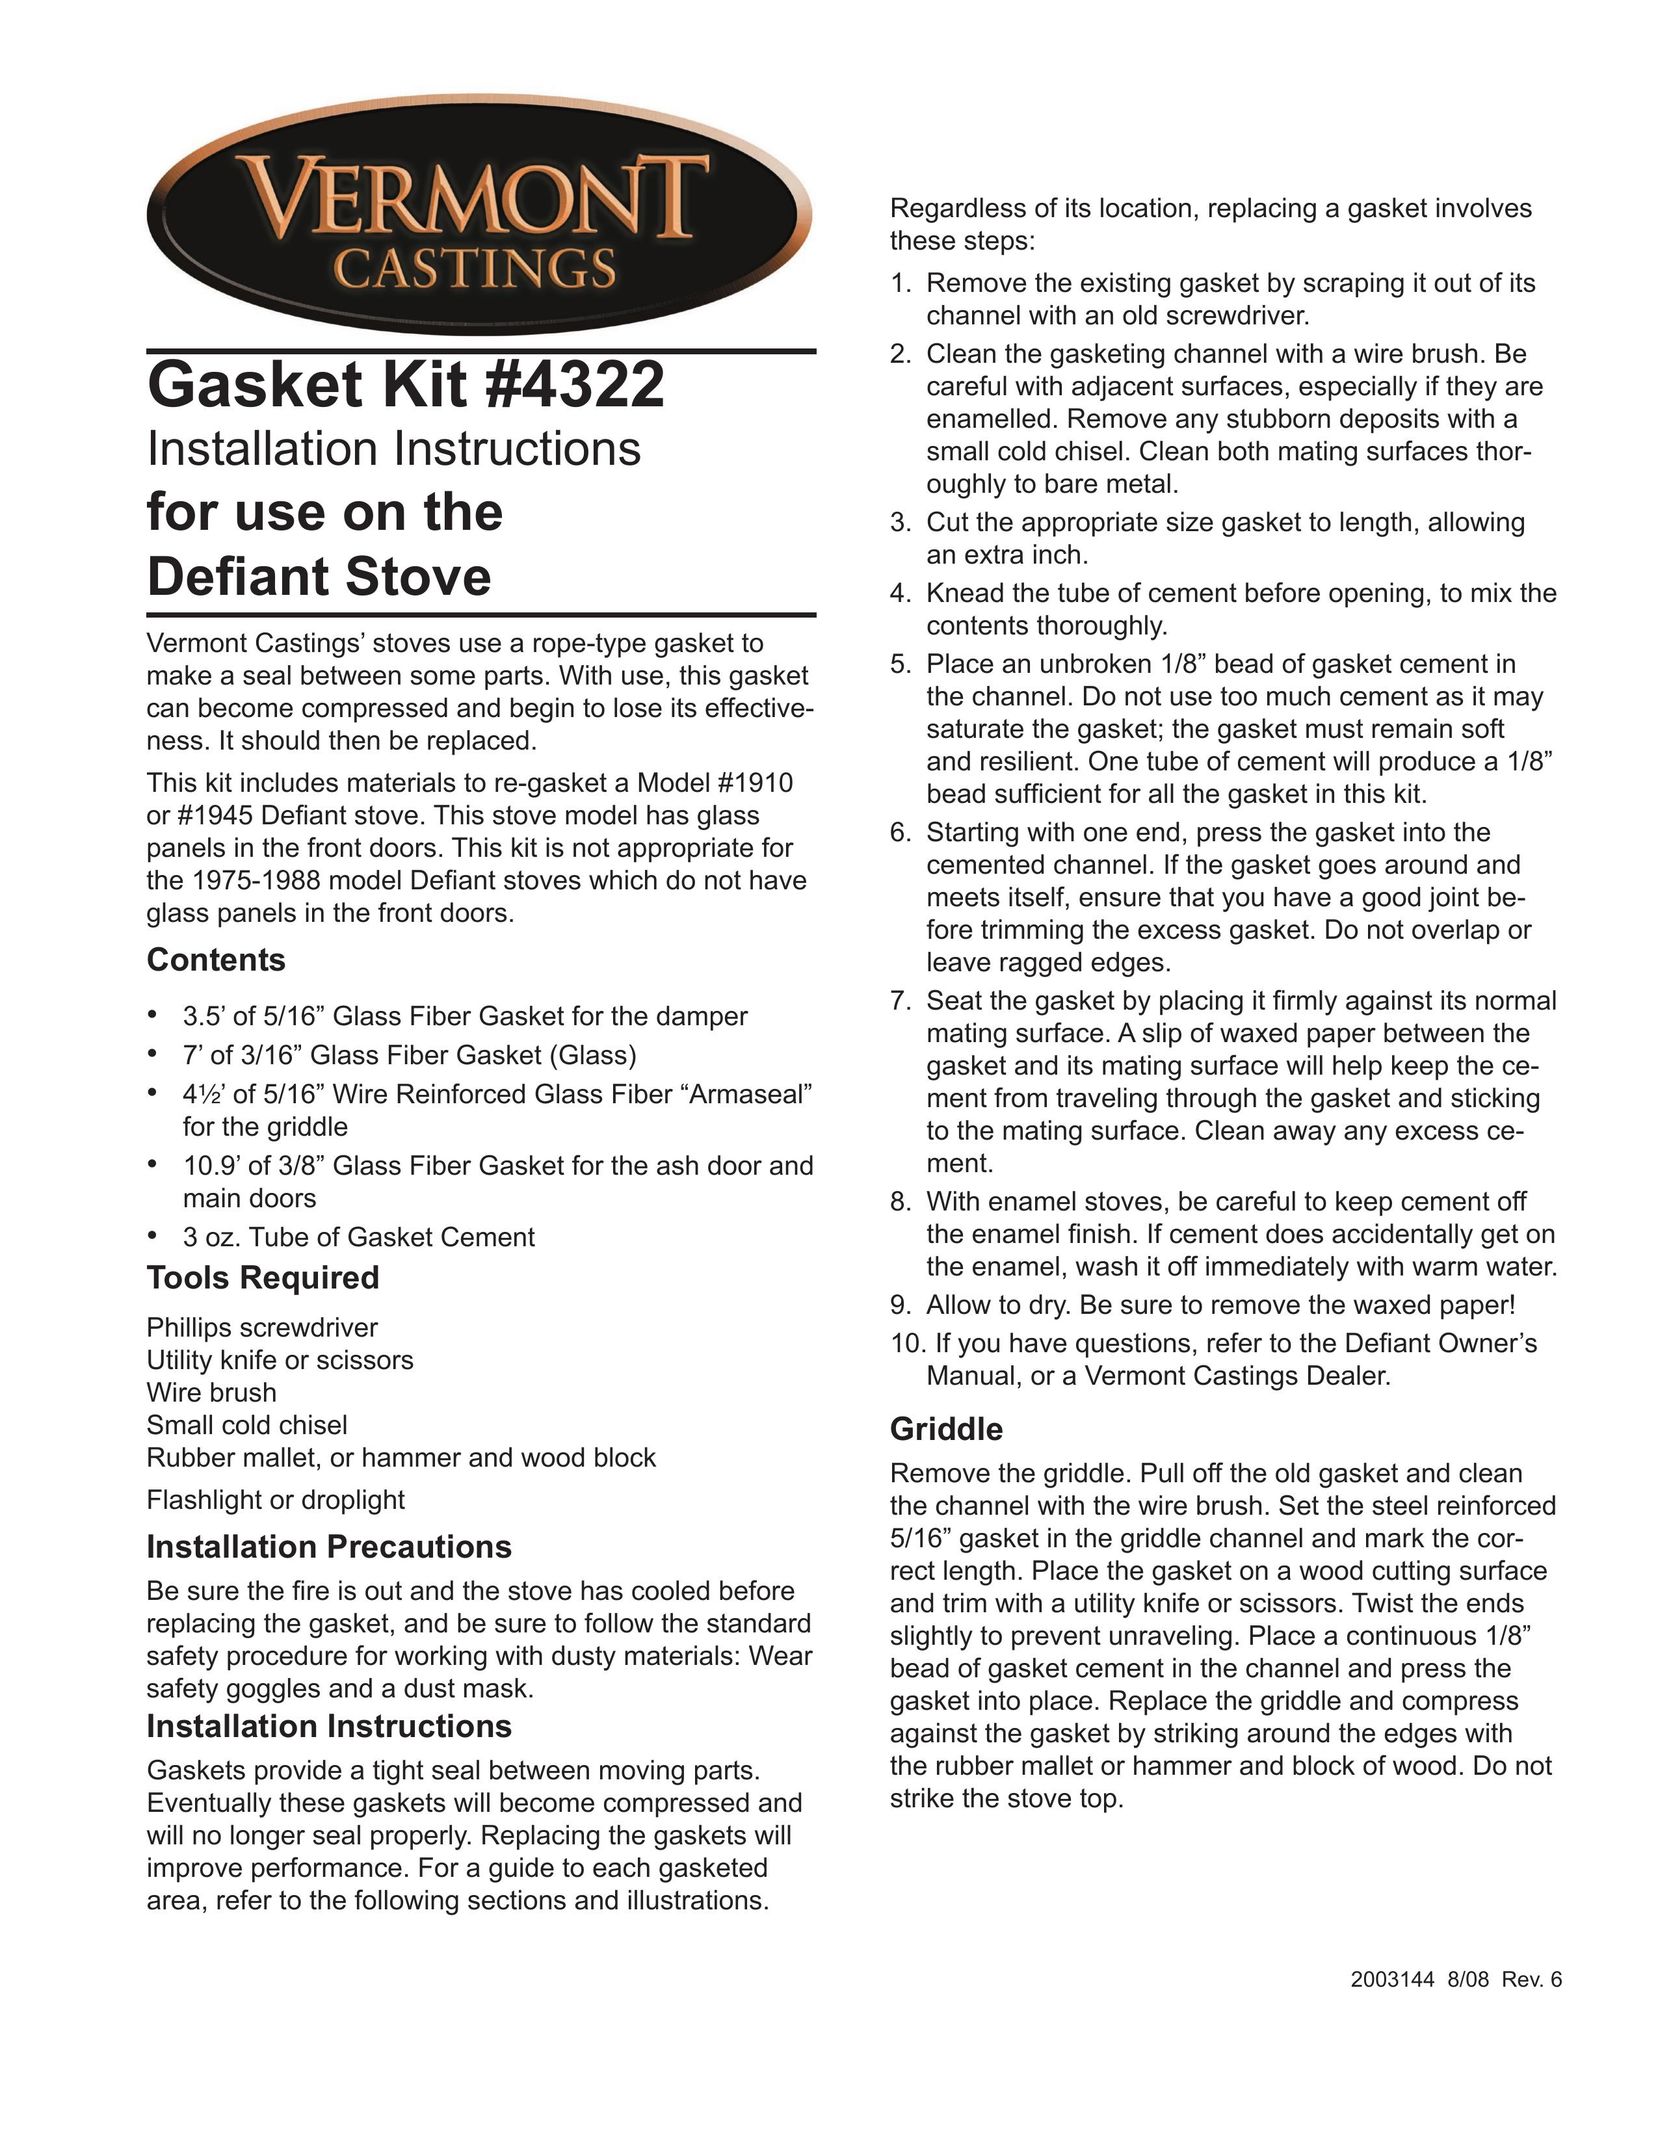 Vermont Casting 4322 Stove User Manual